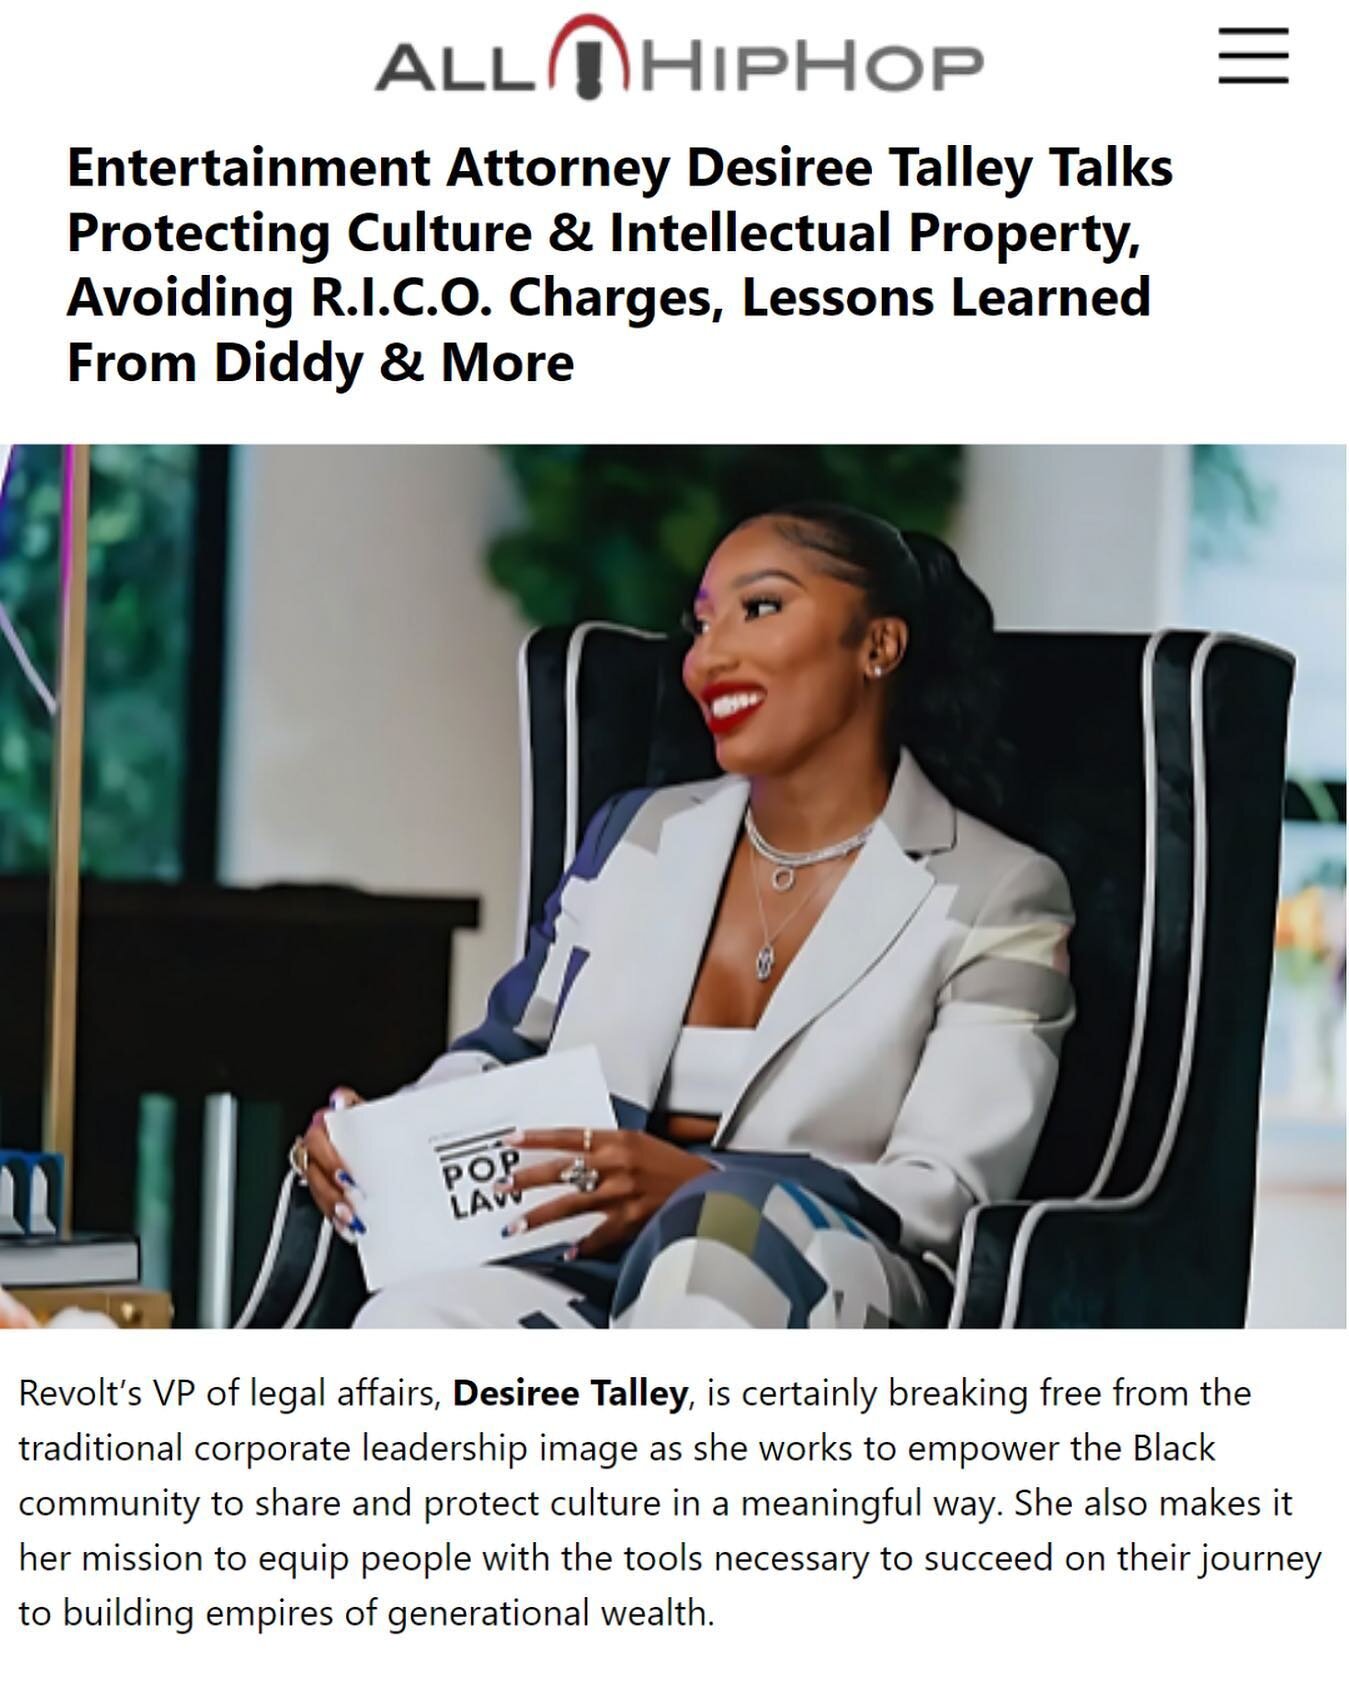 This was such a fun interview with @iamreadavis of @allhiphopcom to talk about my mission to protect Black culture. So many gems 💎 *Link in bio*
.
.
.
#EntertainmentLawyer #LawyersfortheCulture #LawyerBae #CultureCommentator #POPLAW